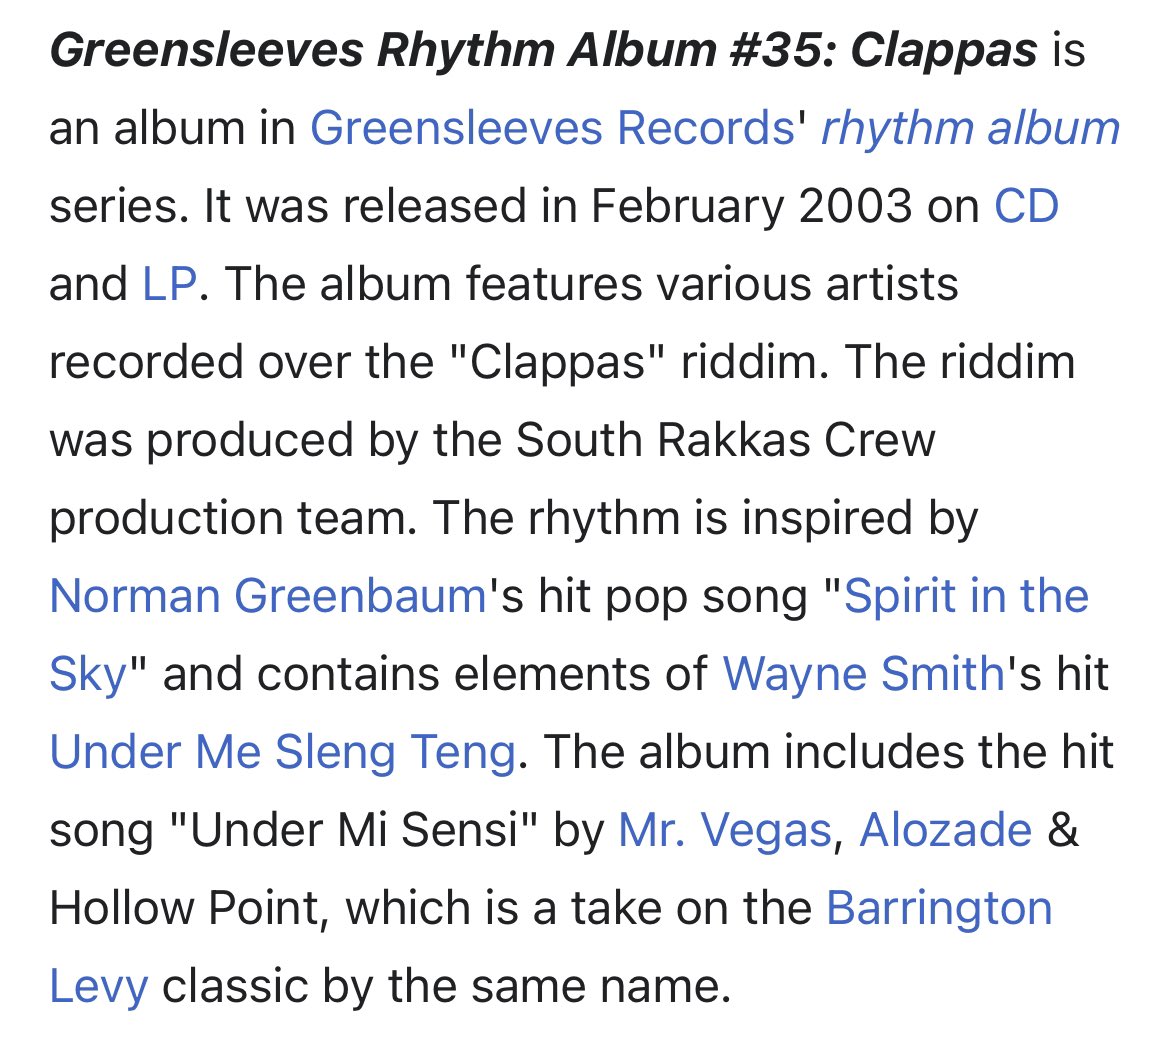 @editaurus @EiderdownSounds @Andr6wMale @JSpacewoman @andyzax @cushac @avantghettonyc @jazyjef @AtBestIsKorny @bourgwick This also sent me down a rabbit hole on the “Clappas Riddim” which I have no idea was based on Spirit In The Sky